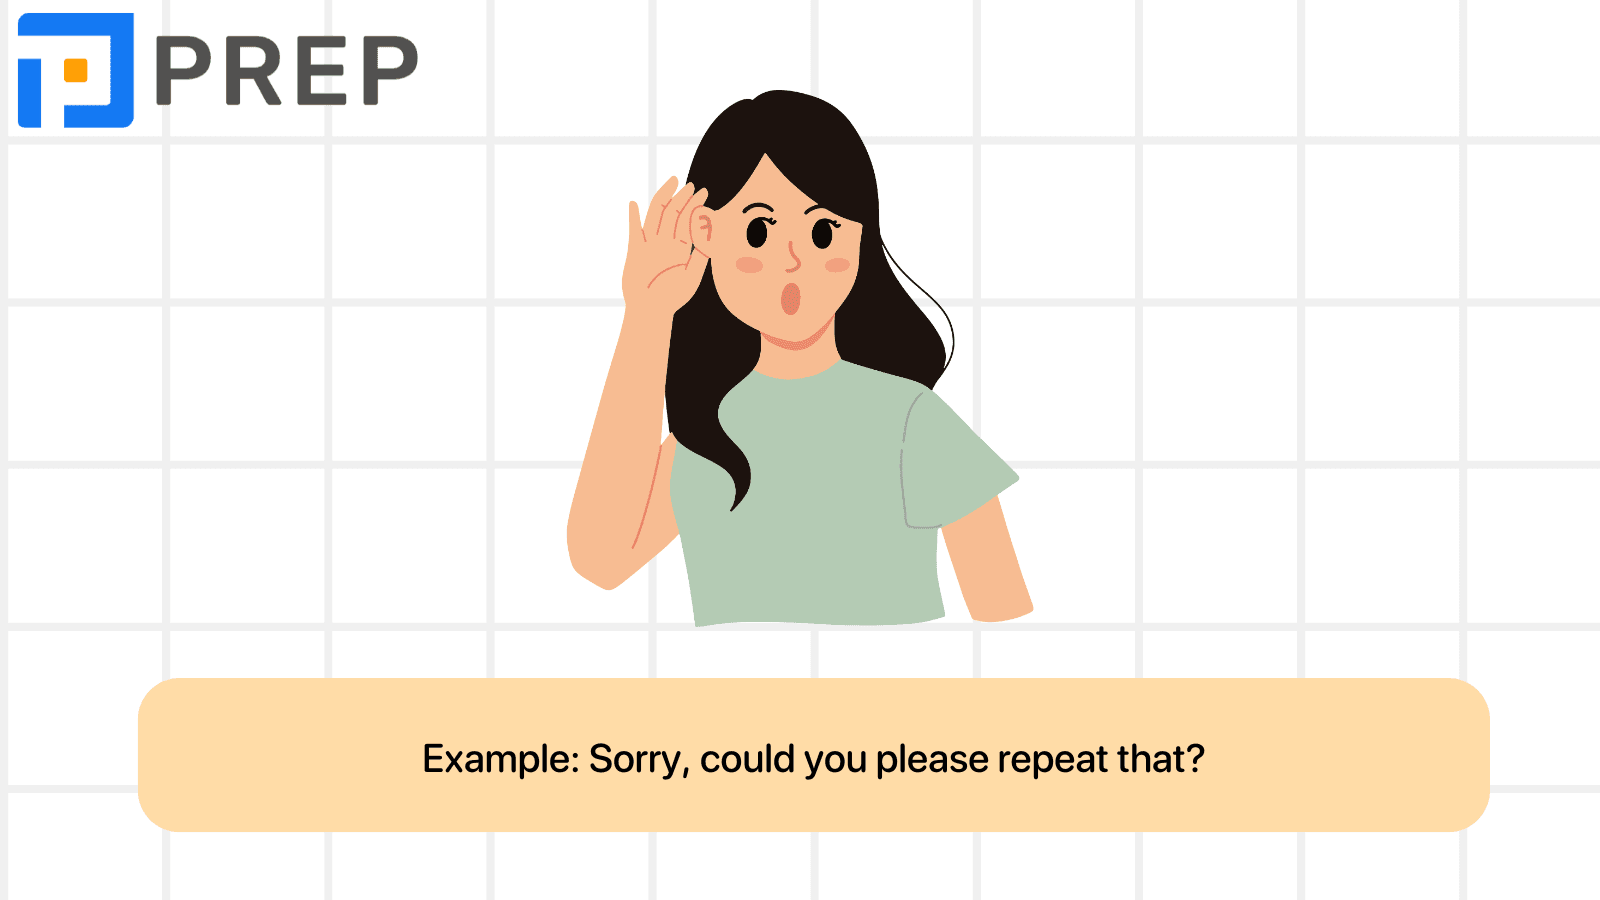 Say sorry in English for not hearing someone clearly and asking them to repeat